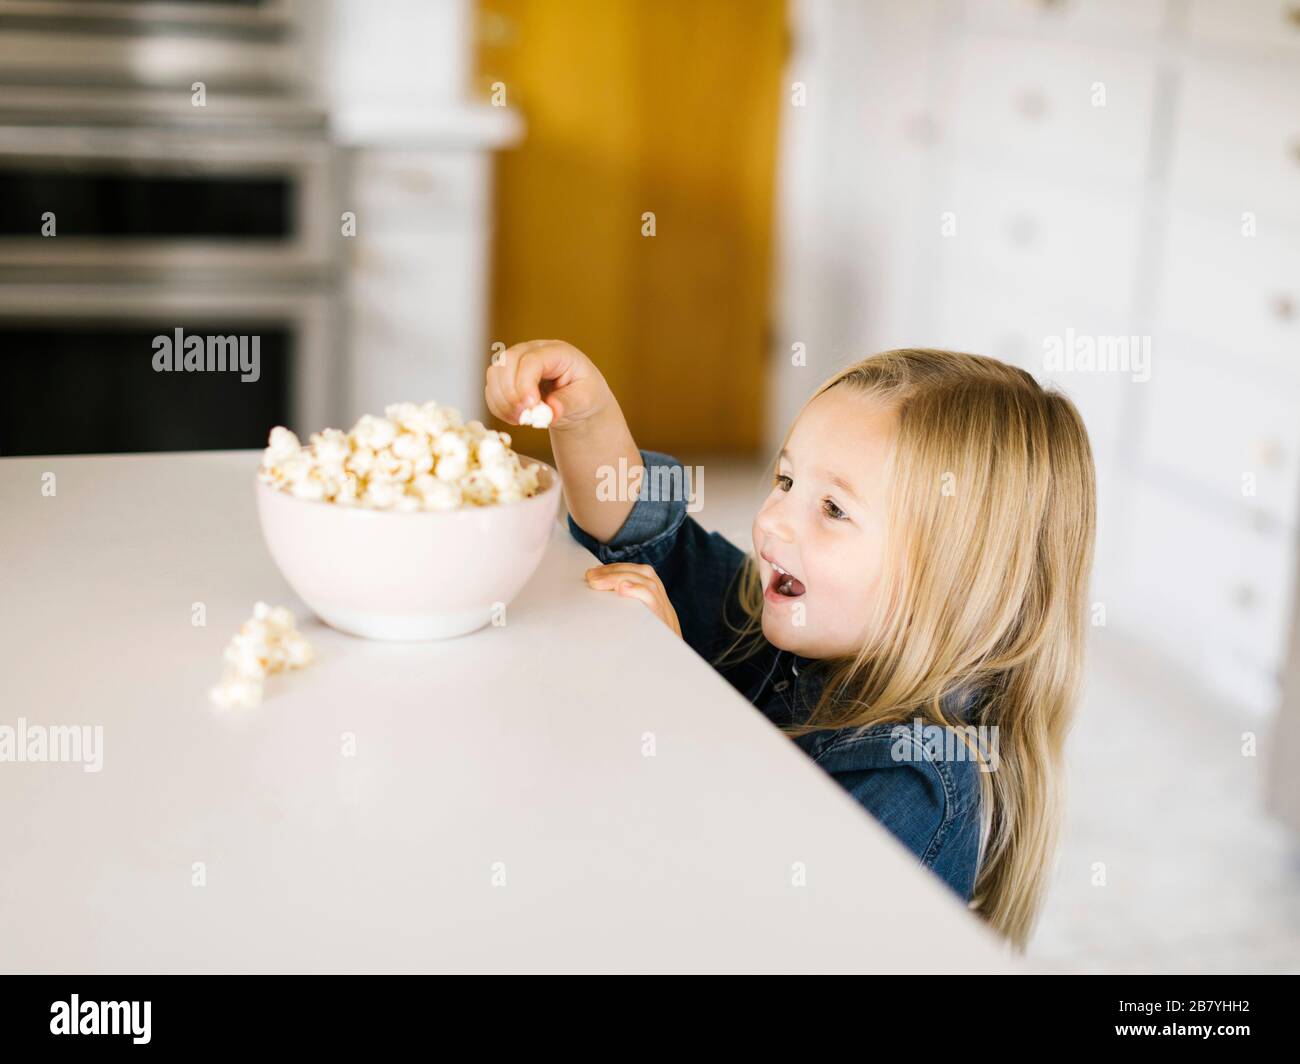 Girl taking popcorn from bowl on kitchen counter Stock Photo